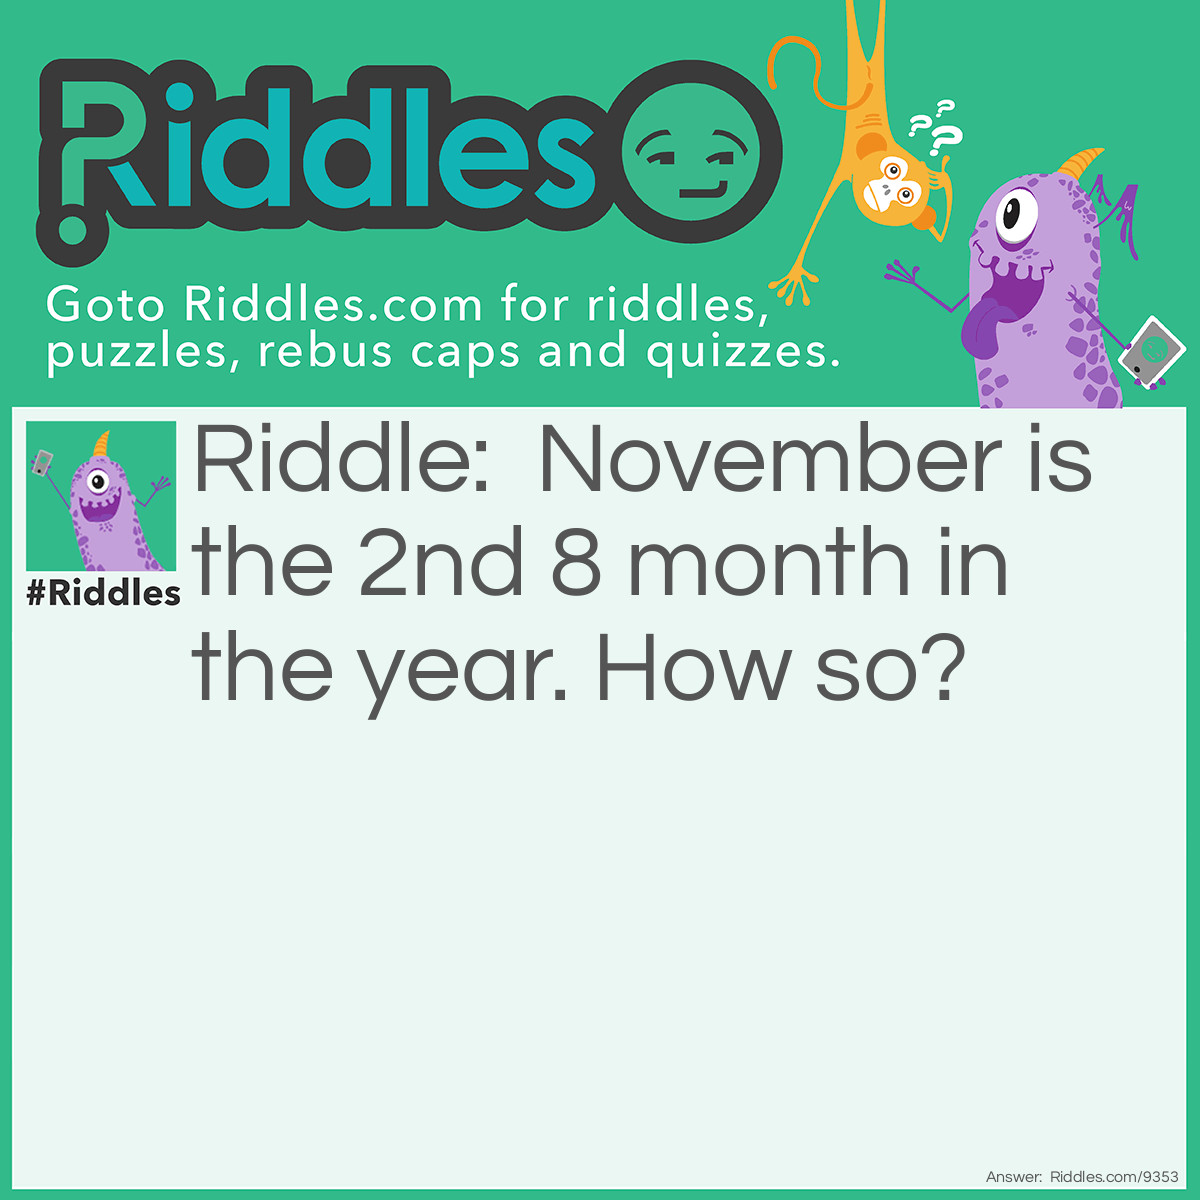 Riddle: November is the 2nd 8 month in the year. How so? Answer: N-O-V-E-M-B-E-R is an 8 letter word. The 2nd one, because February is an 8 letter word, too.